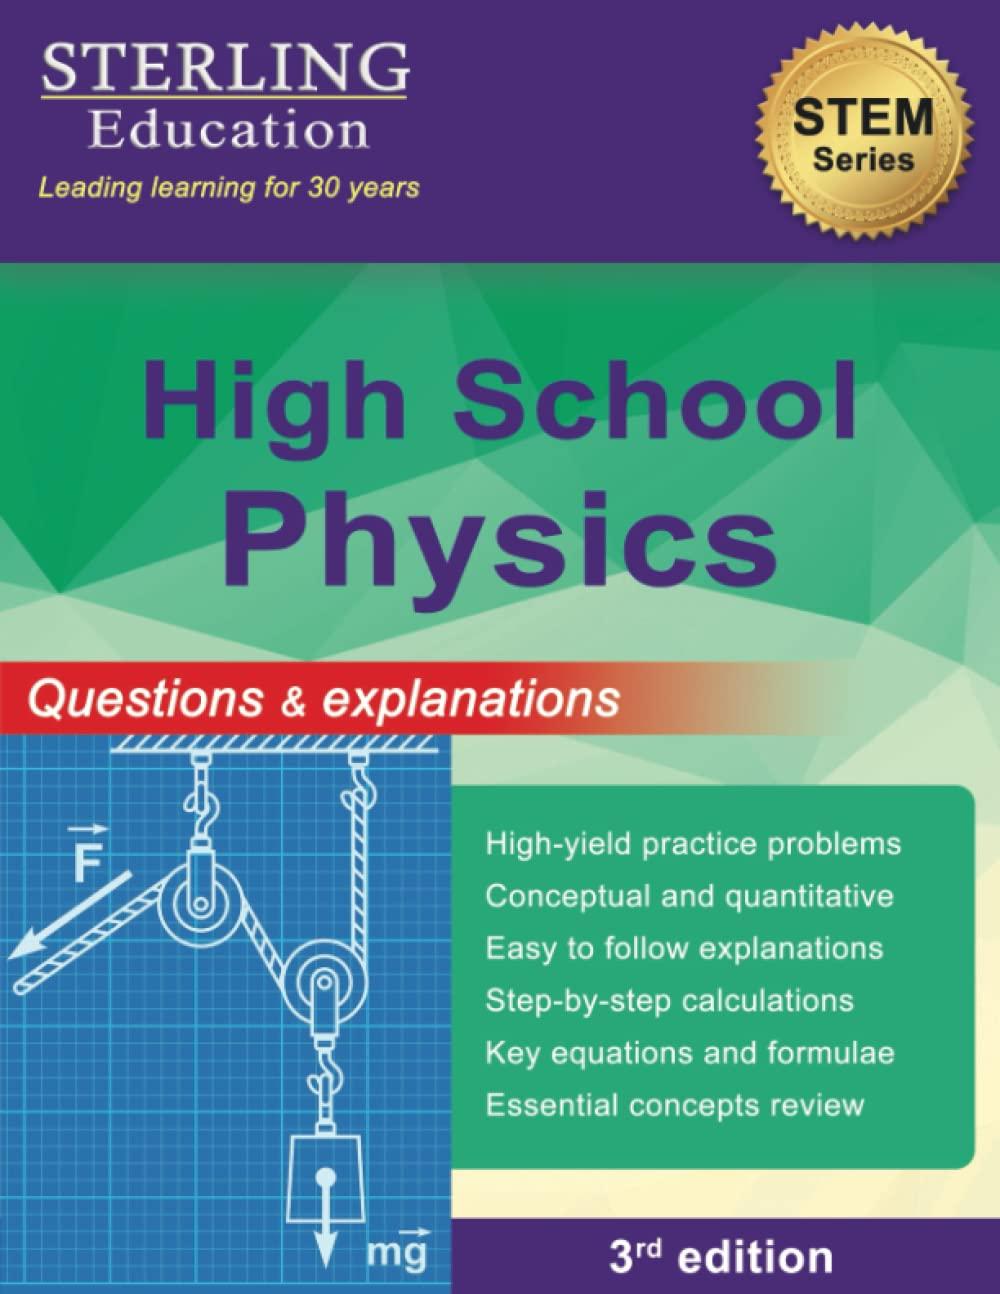 high school physics questions and explanations 3rd edition sterling education b0bkscy5pq, 979-8885570992